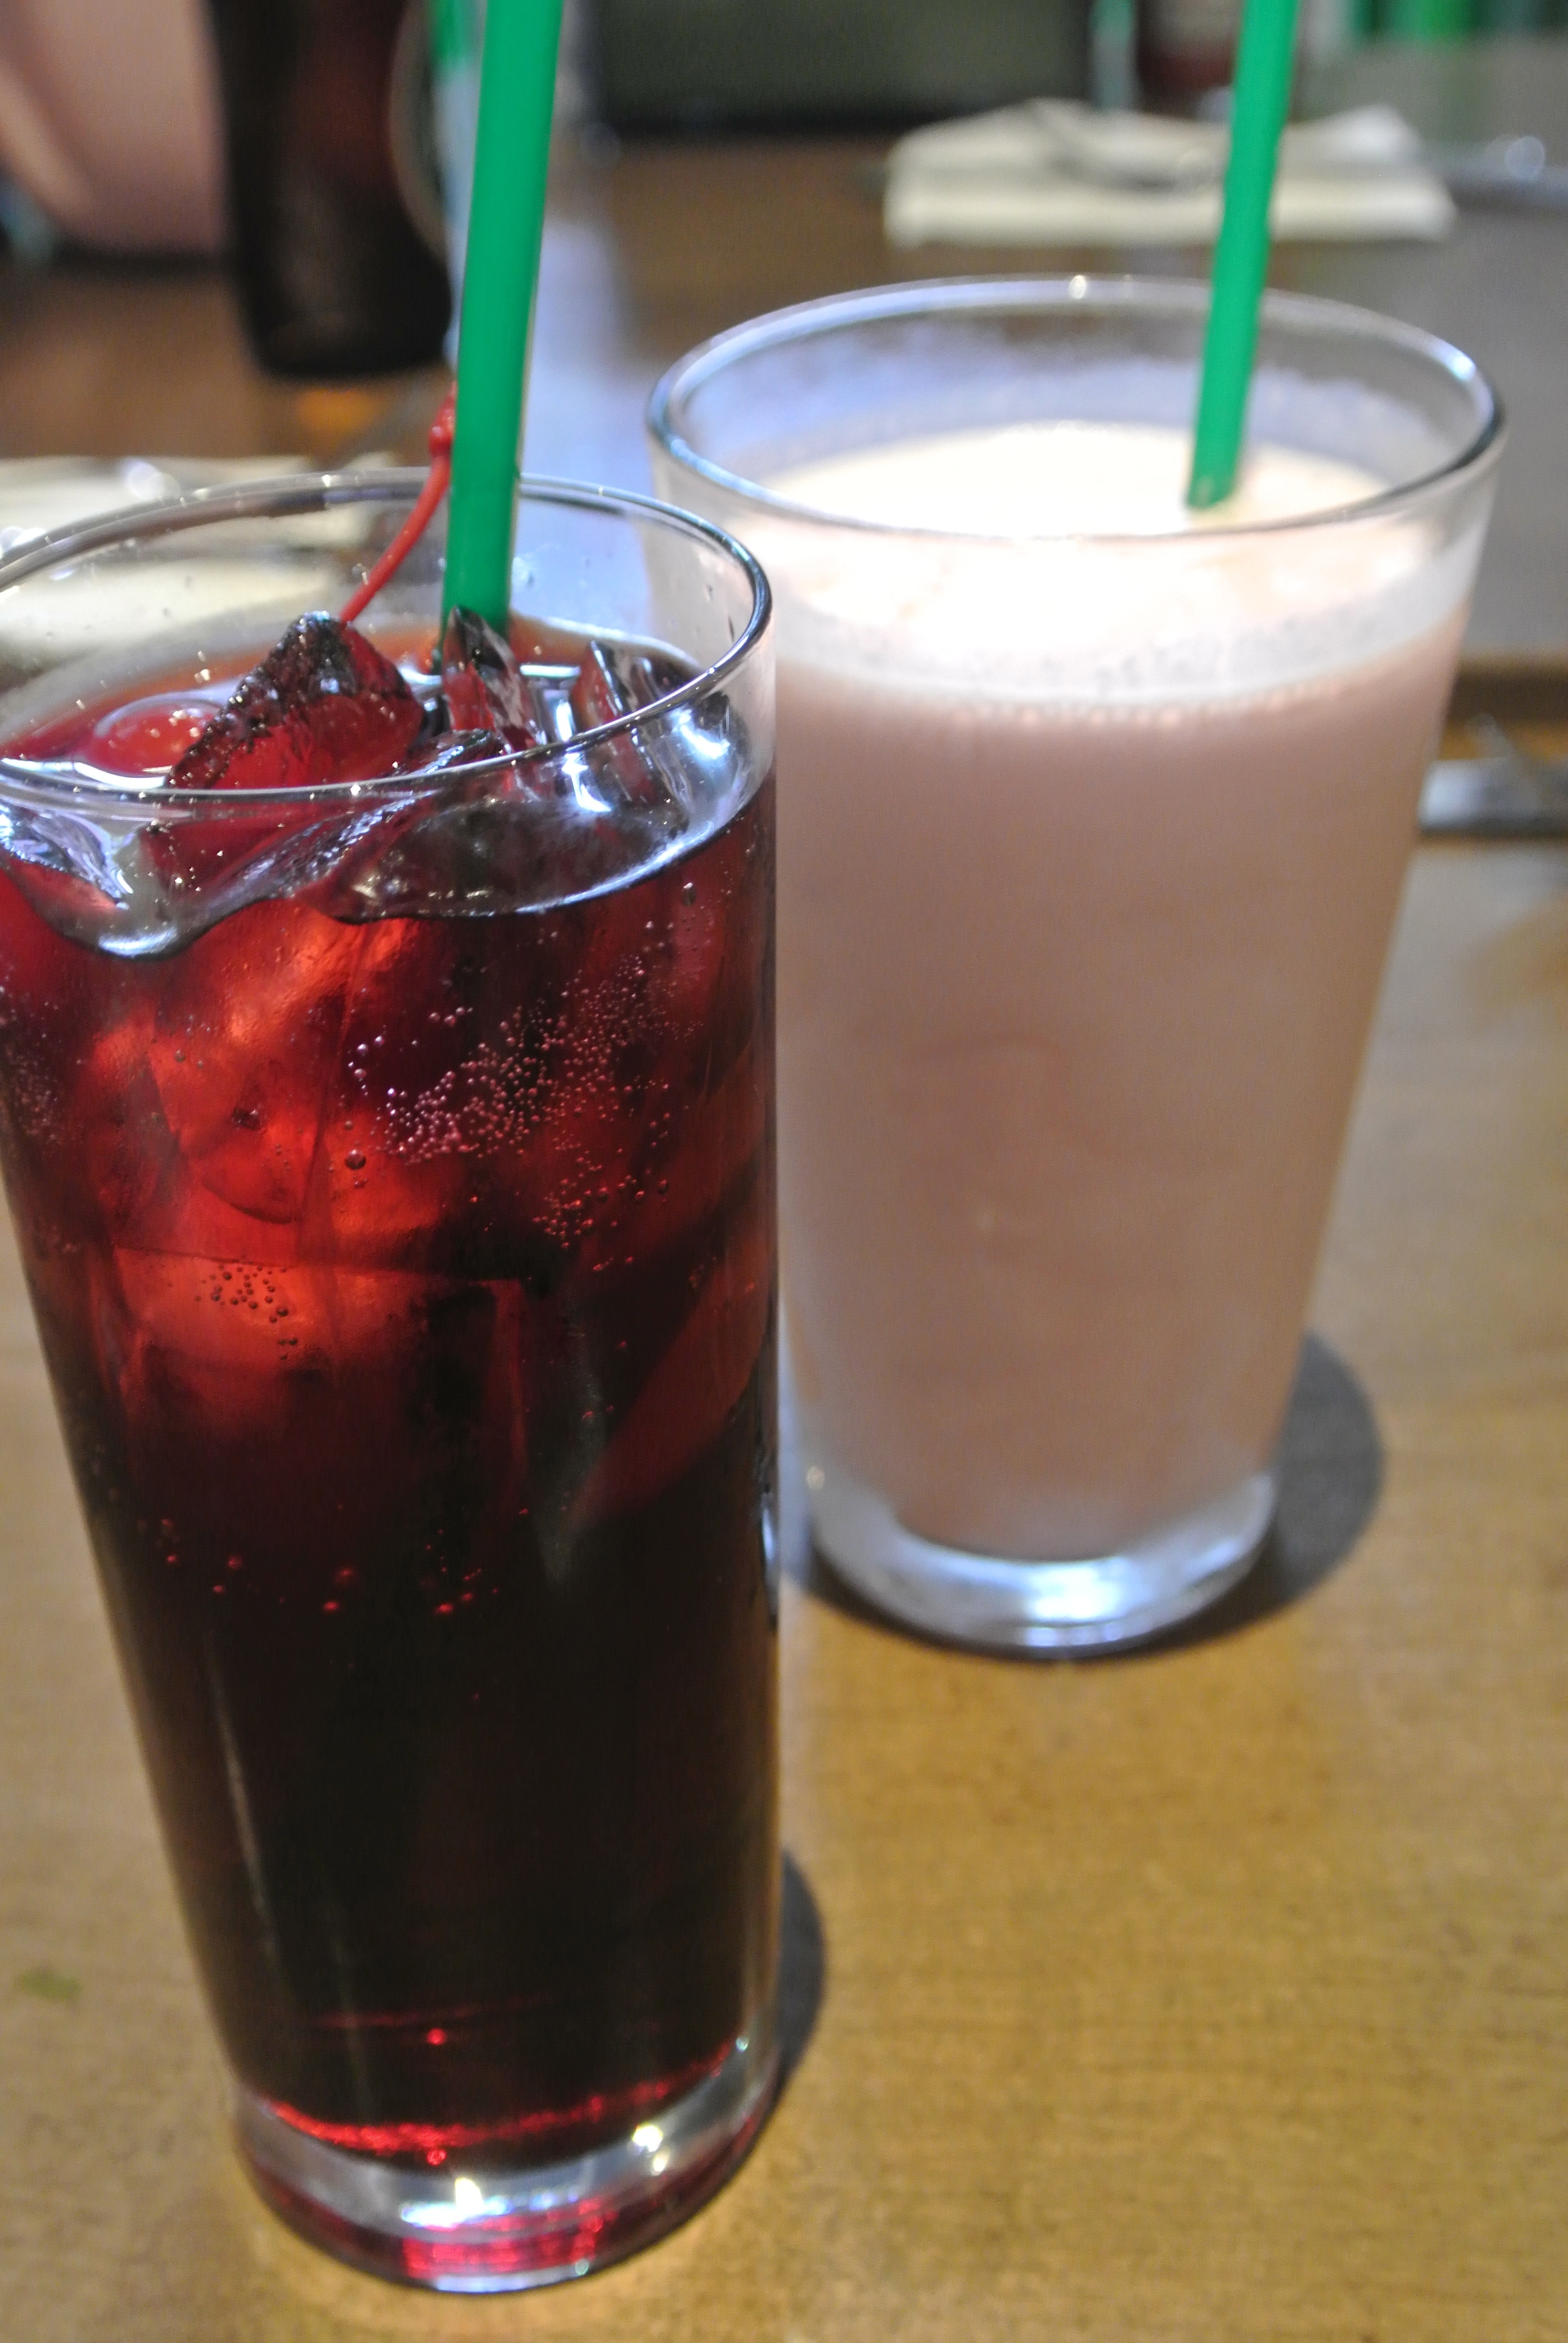 Cocktails - Cherry Coke and Blueberry Pie adult shake.